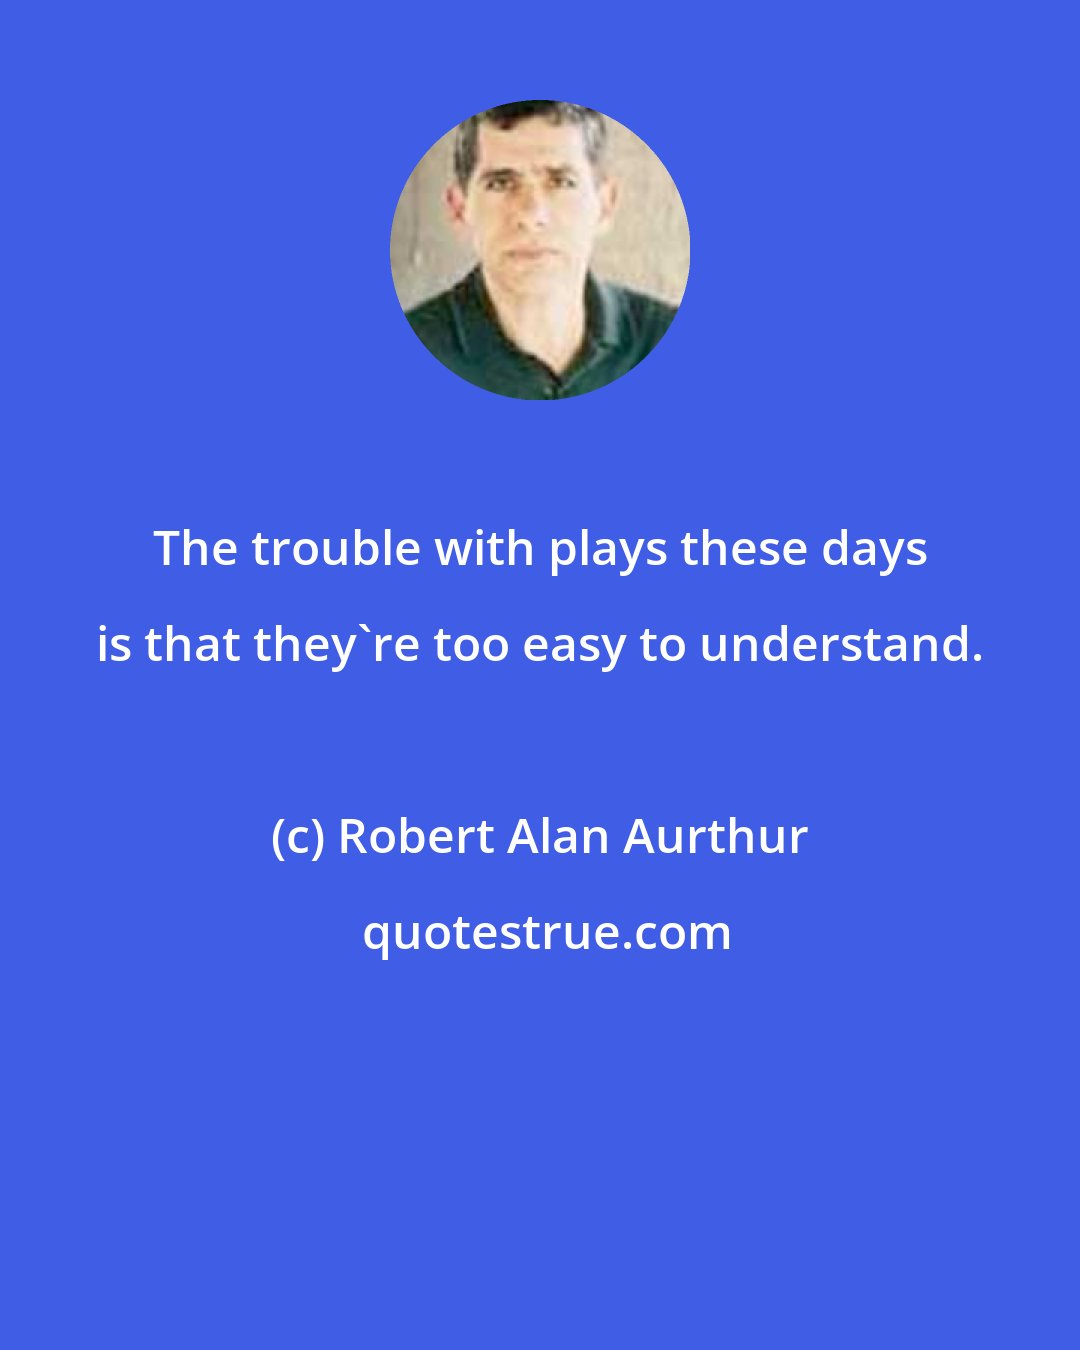 Robert Alan Aurthur: The trouble with plays these days is that they're too easy to understand.